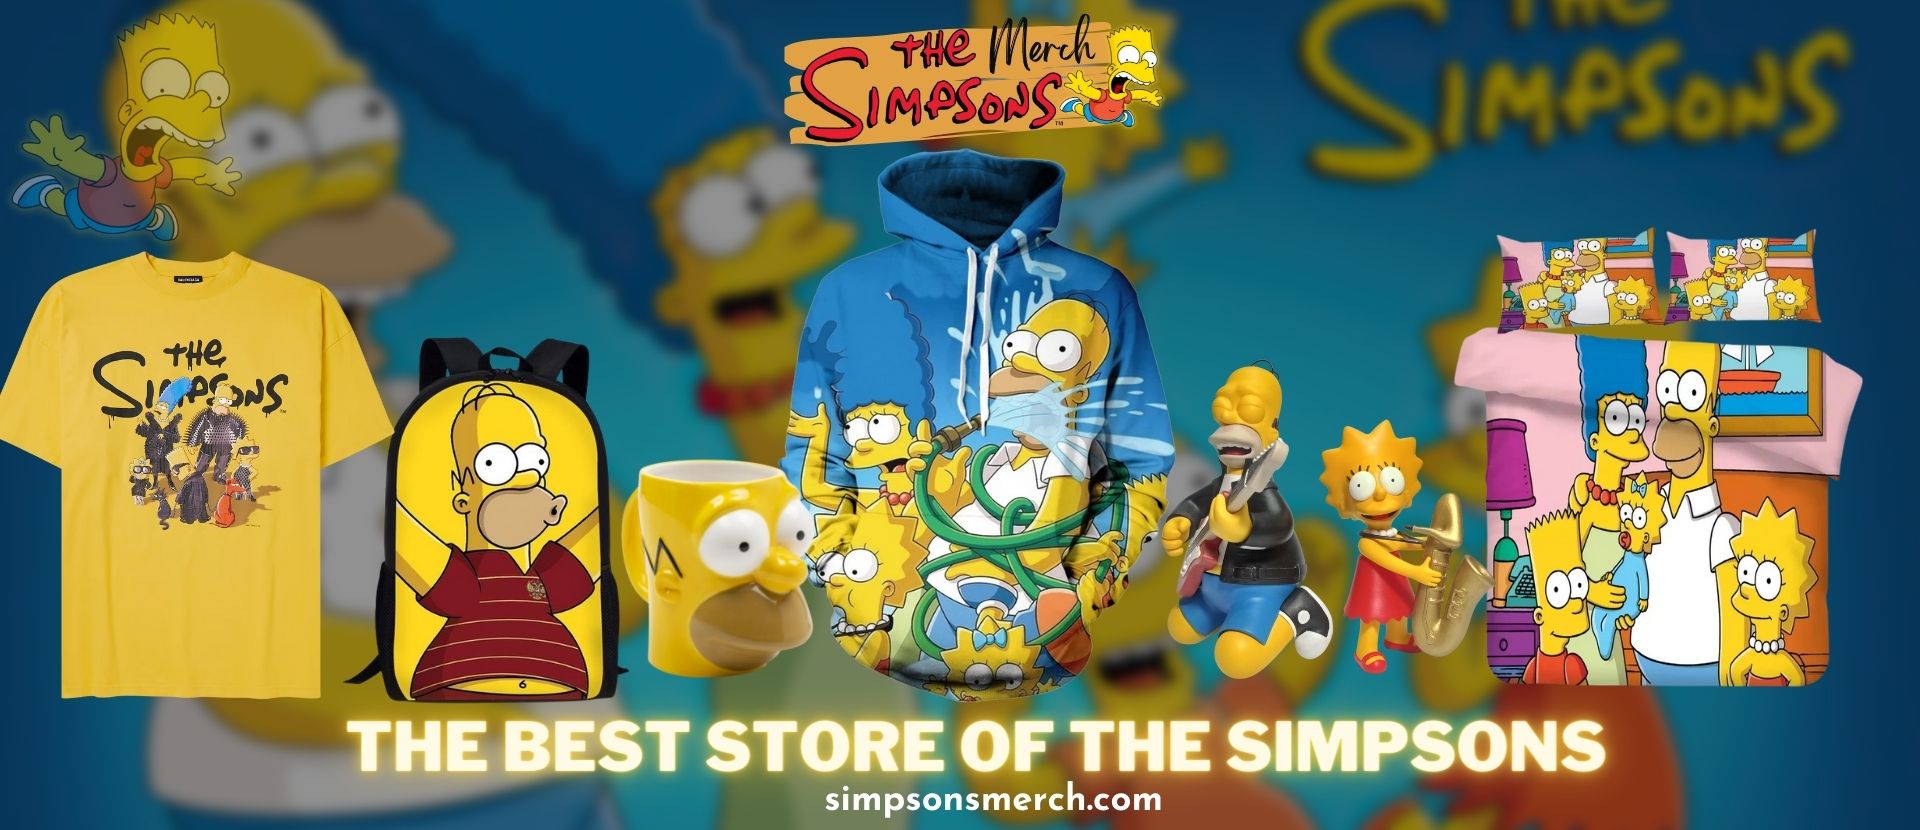 Simp Sons Store Banner 1 - The Simpsons Merch